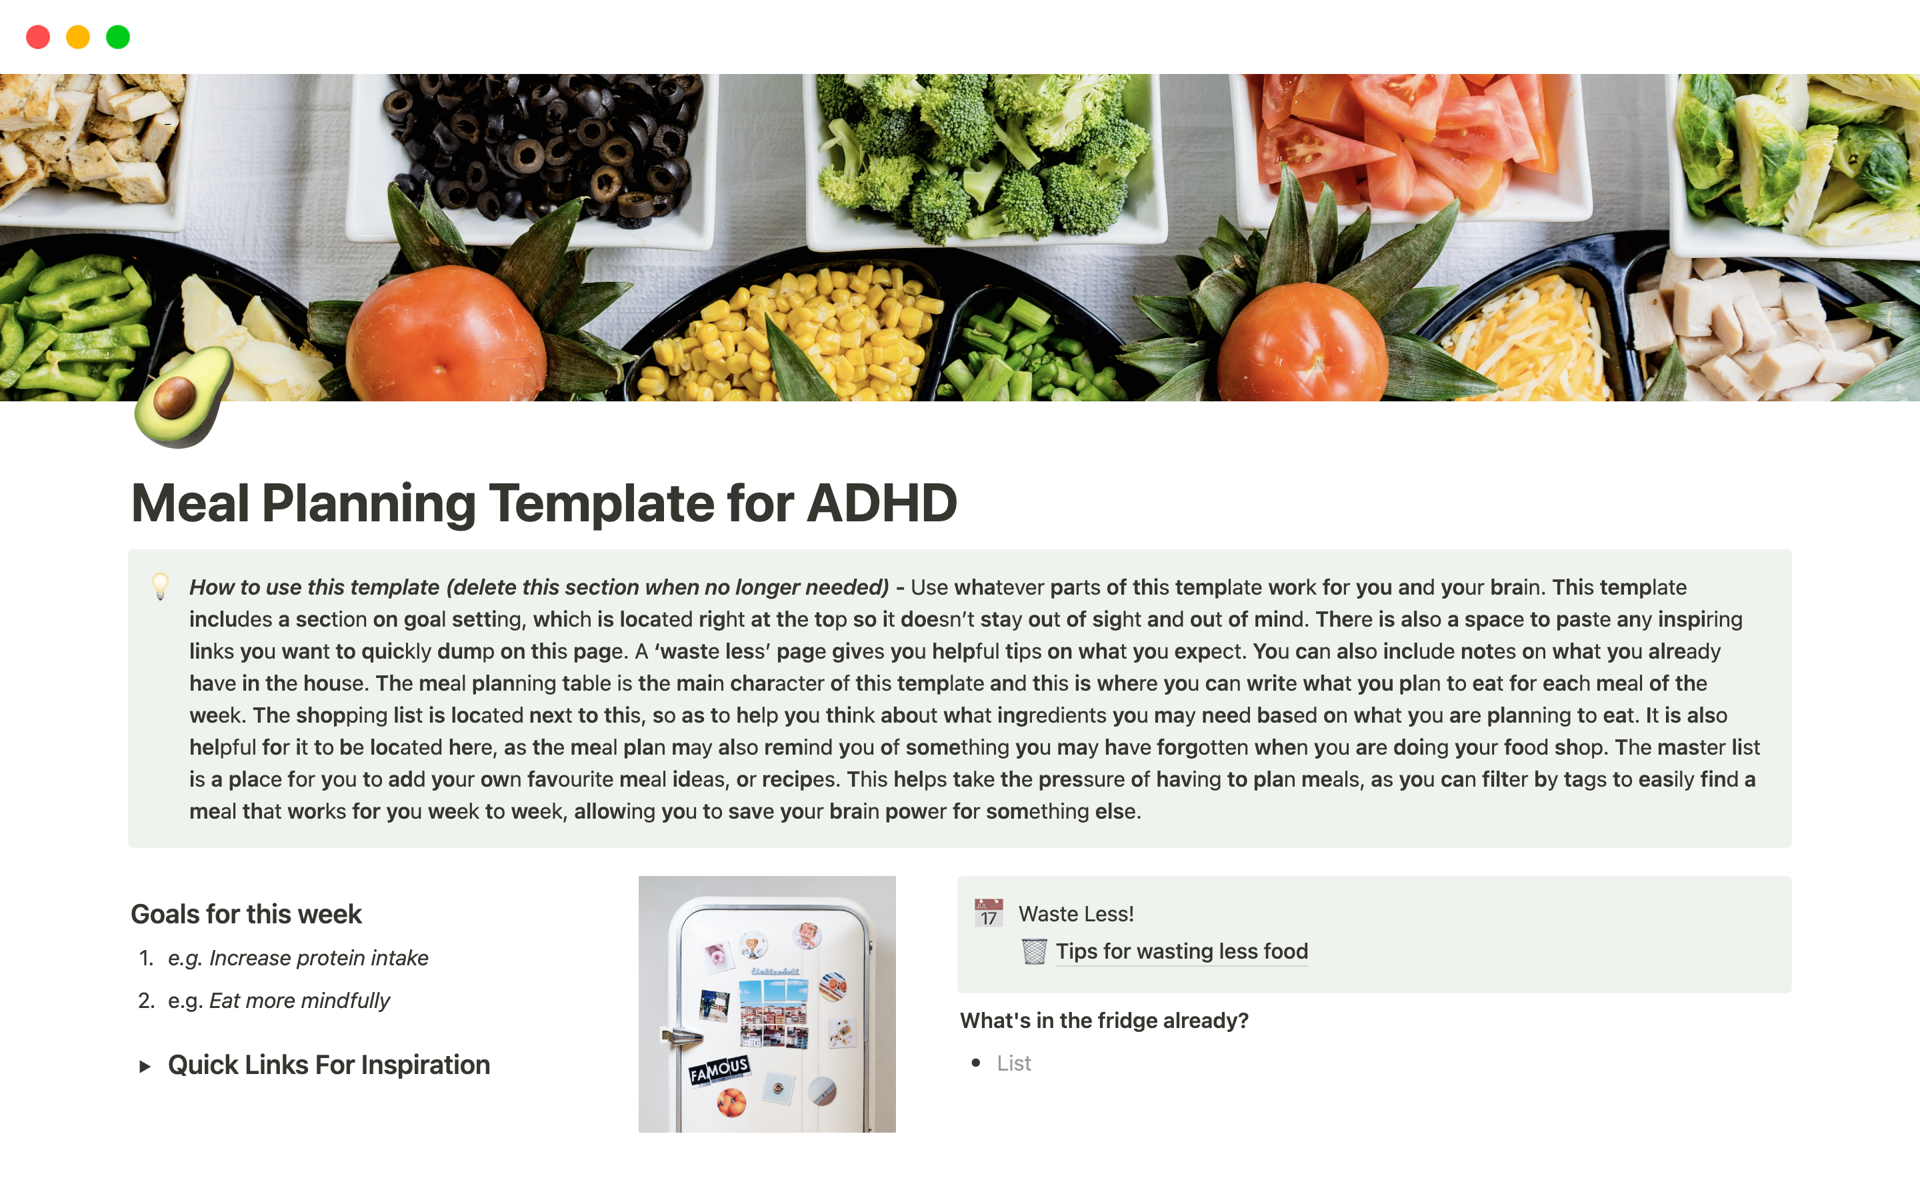 This template is made for people with ADHD to help you plan meals and overcome the challenges associated with ADHD and executive function in regards to meal planning.